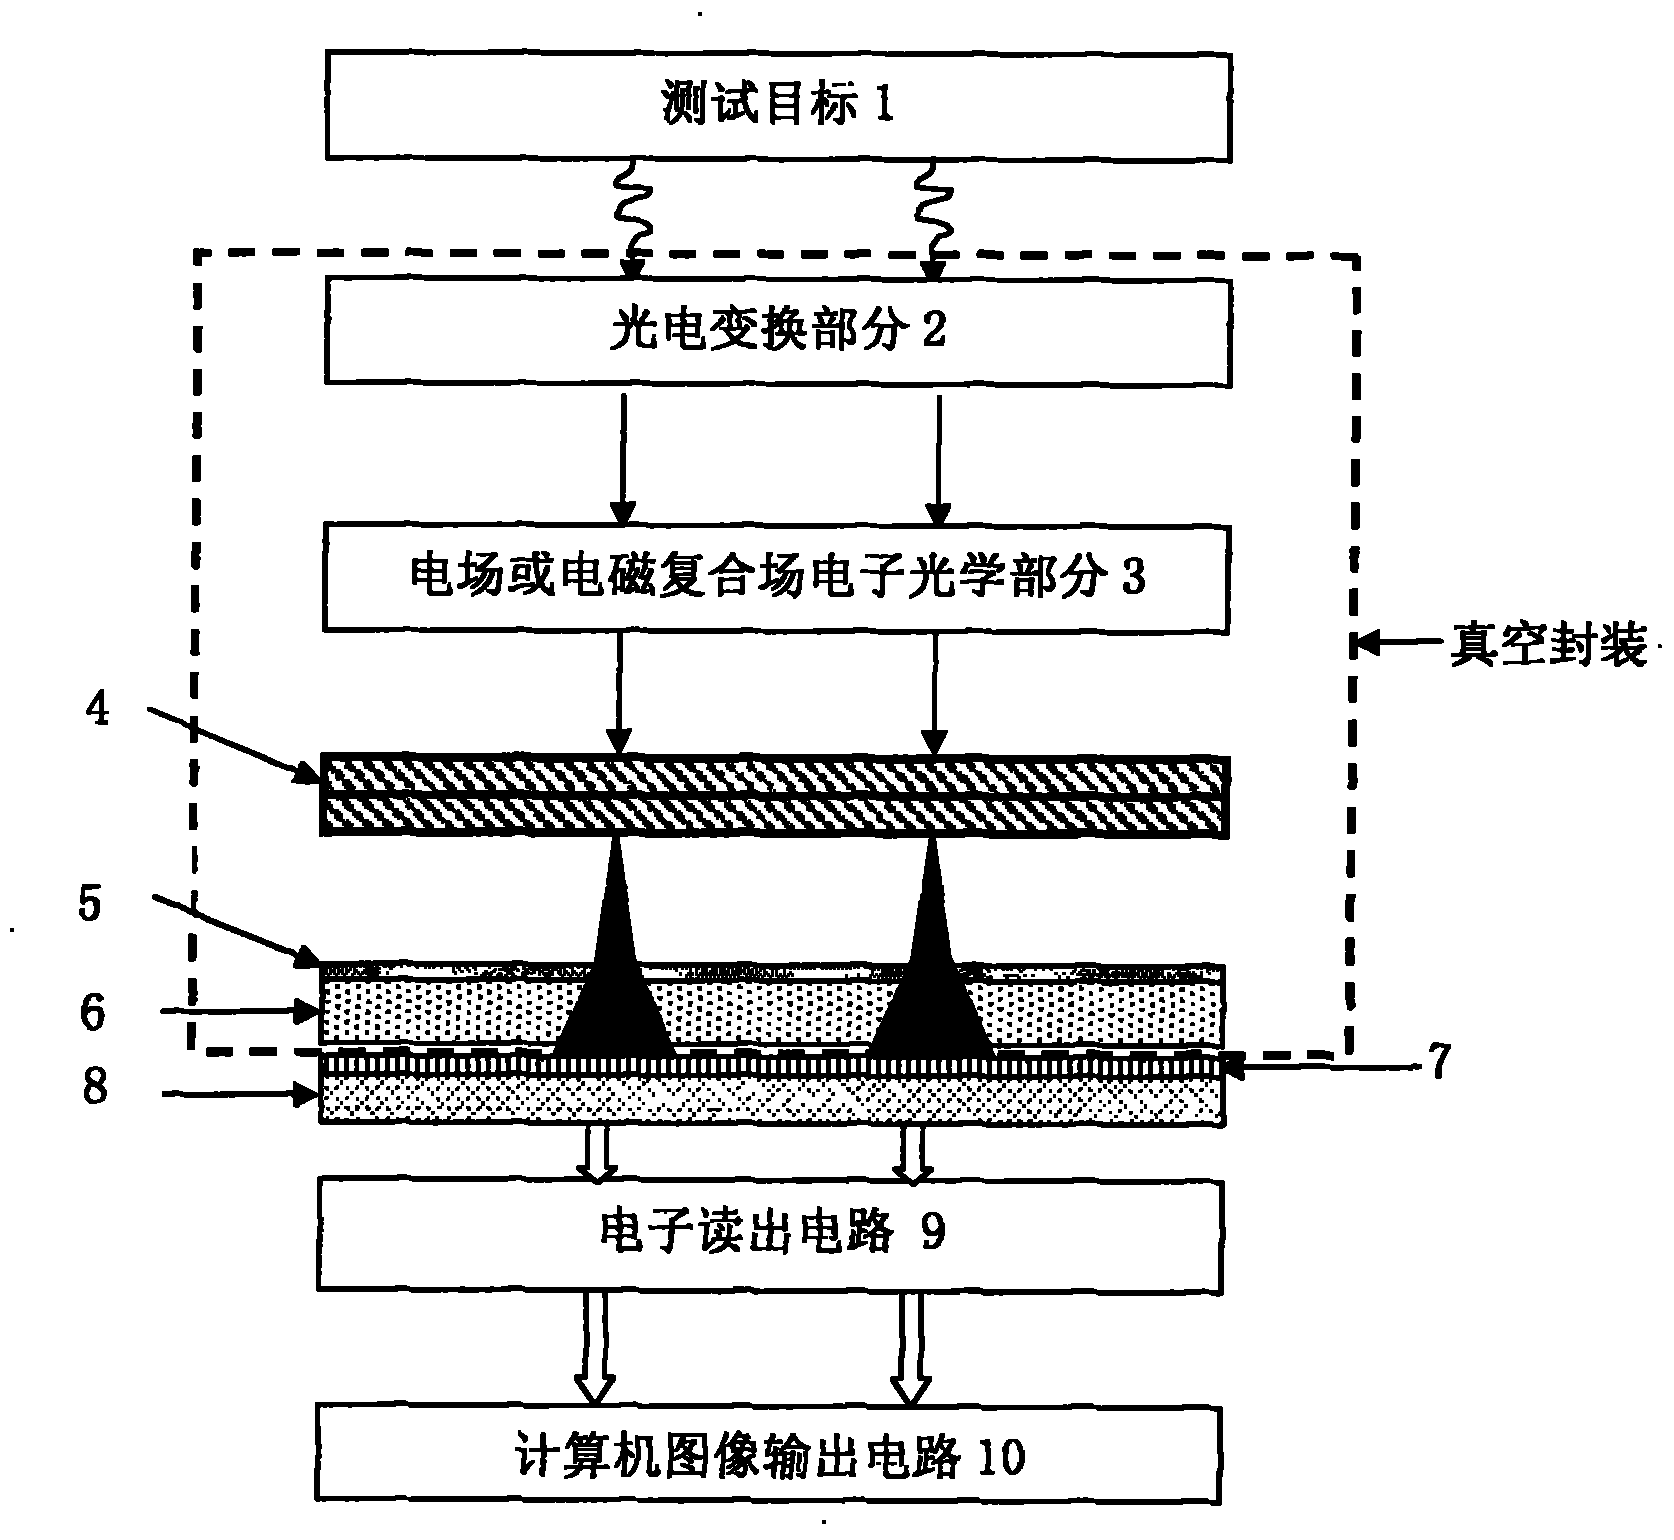 Electric charge induction image forming method based on semiconductor layer